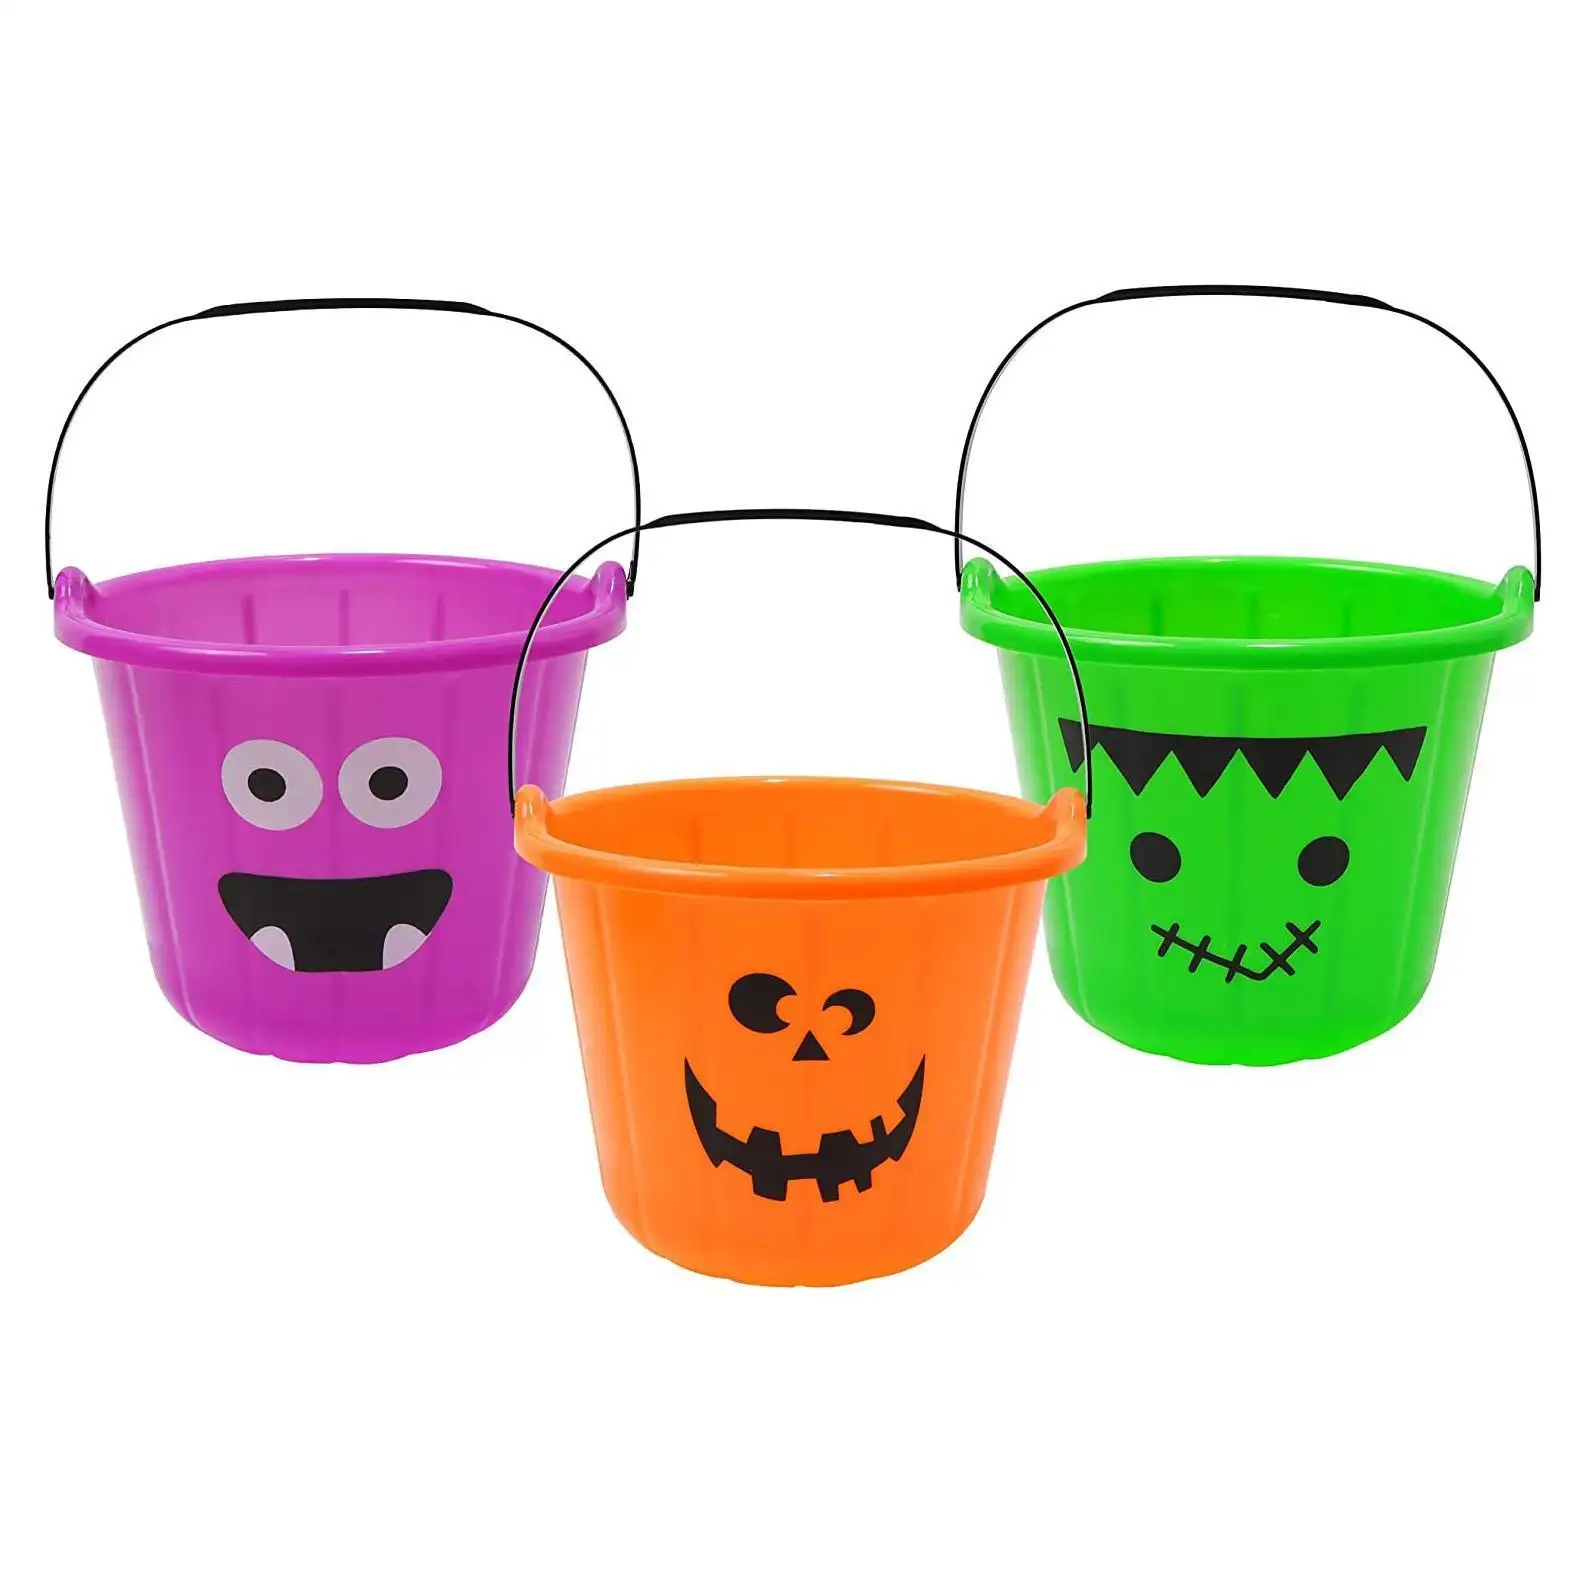 Halloween Candy Baskets Trick or Treat Buckets for Kids Portable Candy Plastic Pails for Halloween Party Supplies